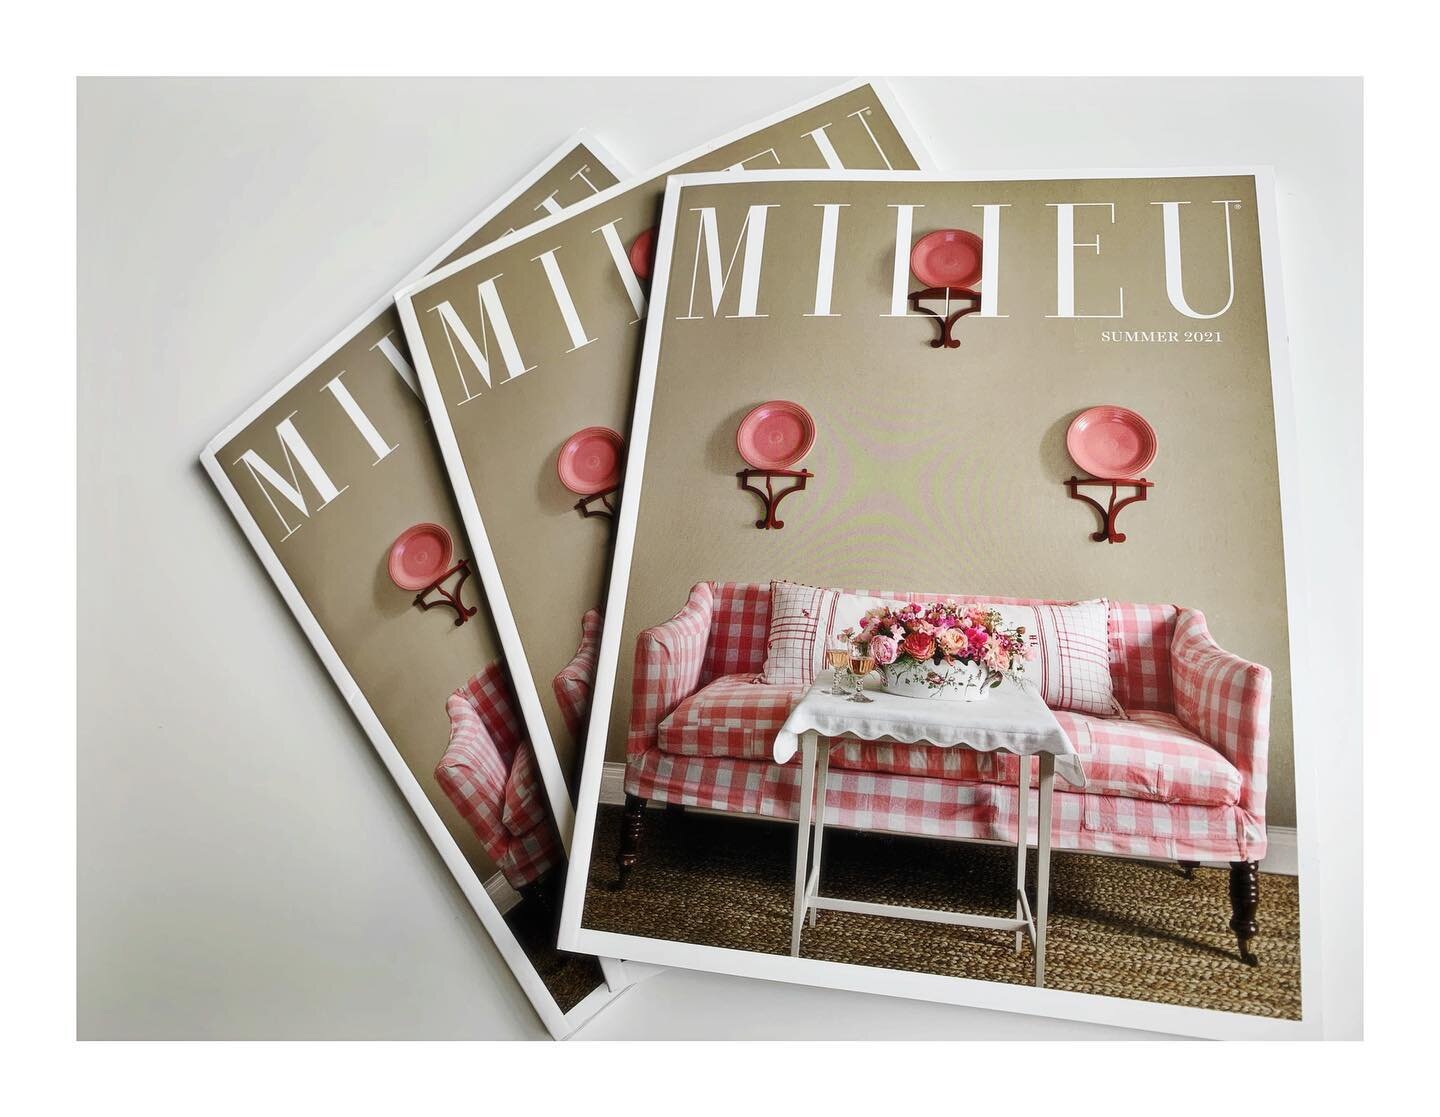 #repost @milieumag 
.
MILIEU&rsquo;s SUMMER 2021 ISSUE IS HERE 

A MILIEU SEEKER is a storyteller with uncompromised creativity.

&ldquo;And, the everyday here is pretty amazing. This house has a storied feel; it&rsquo;s a place where, as their child